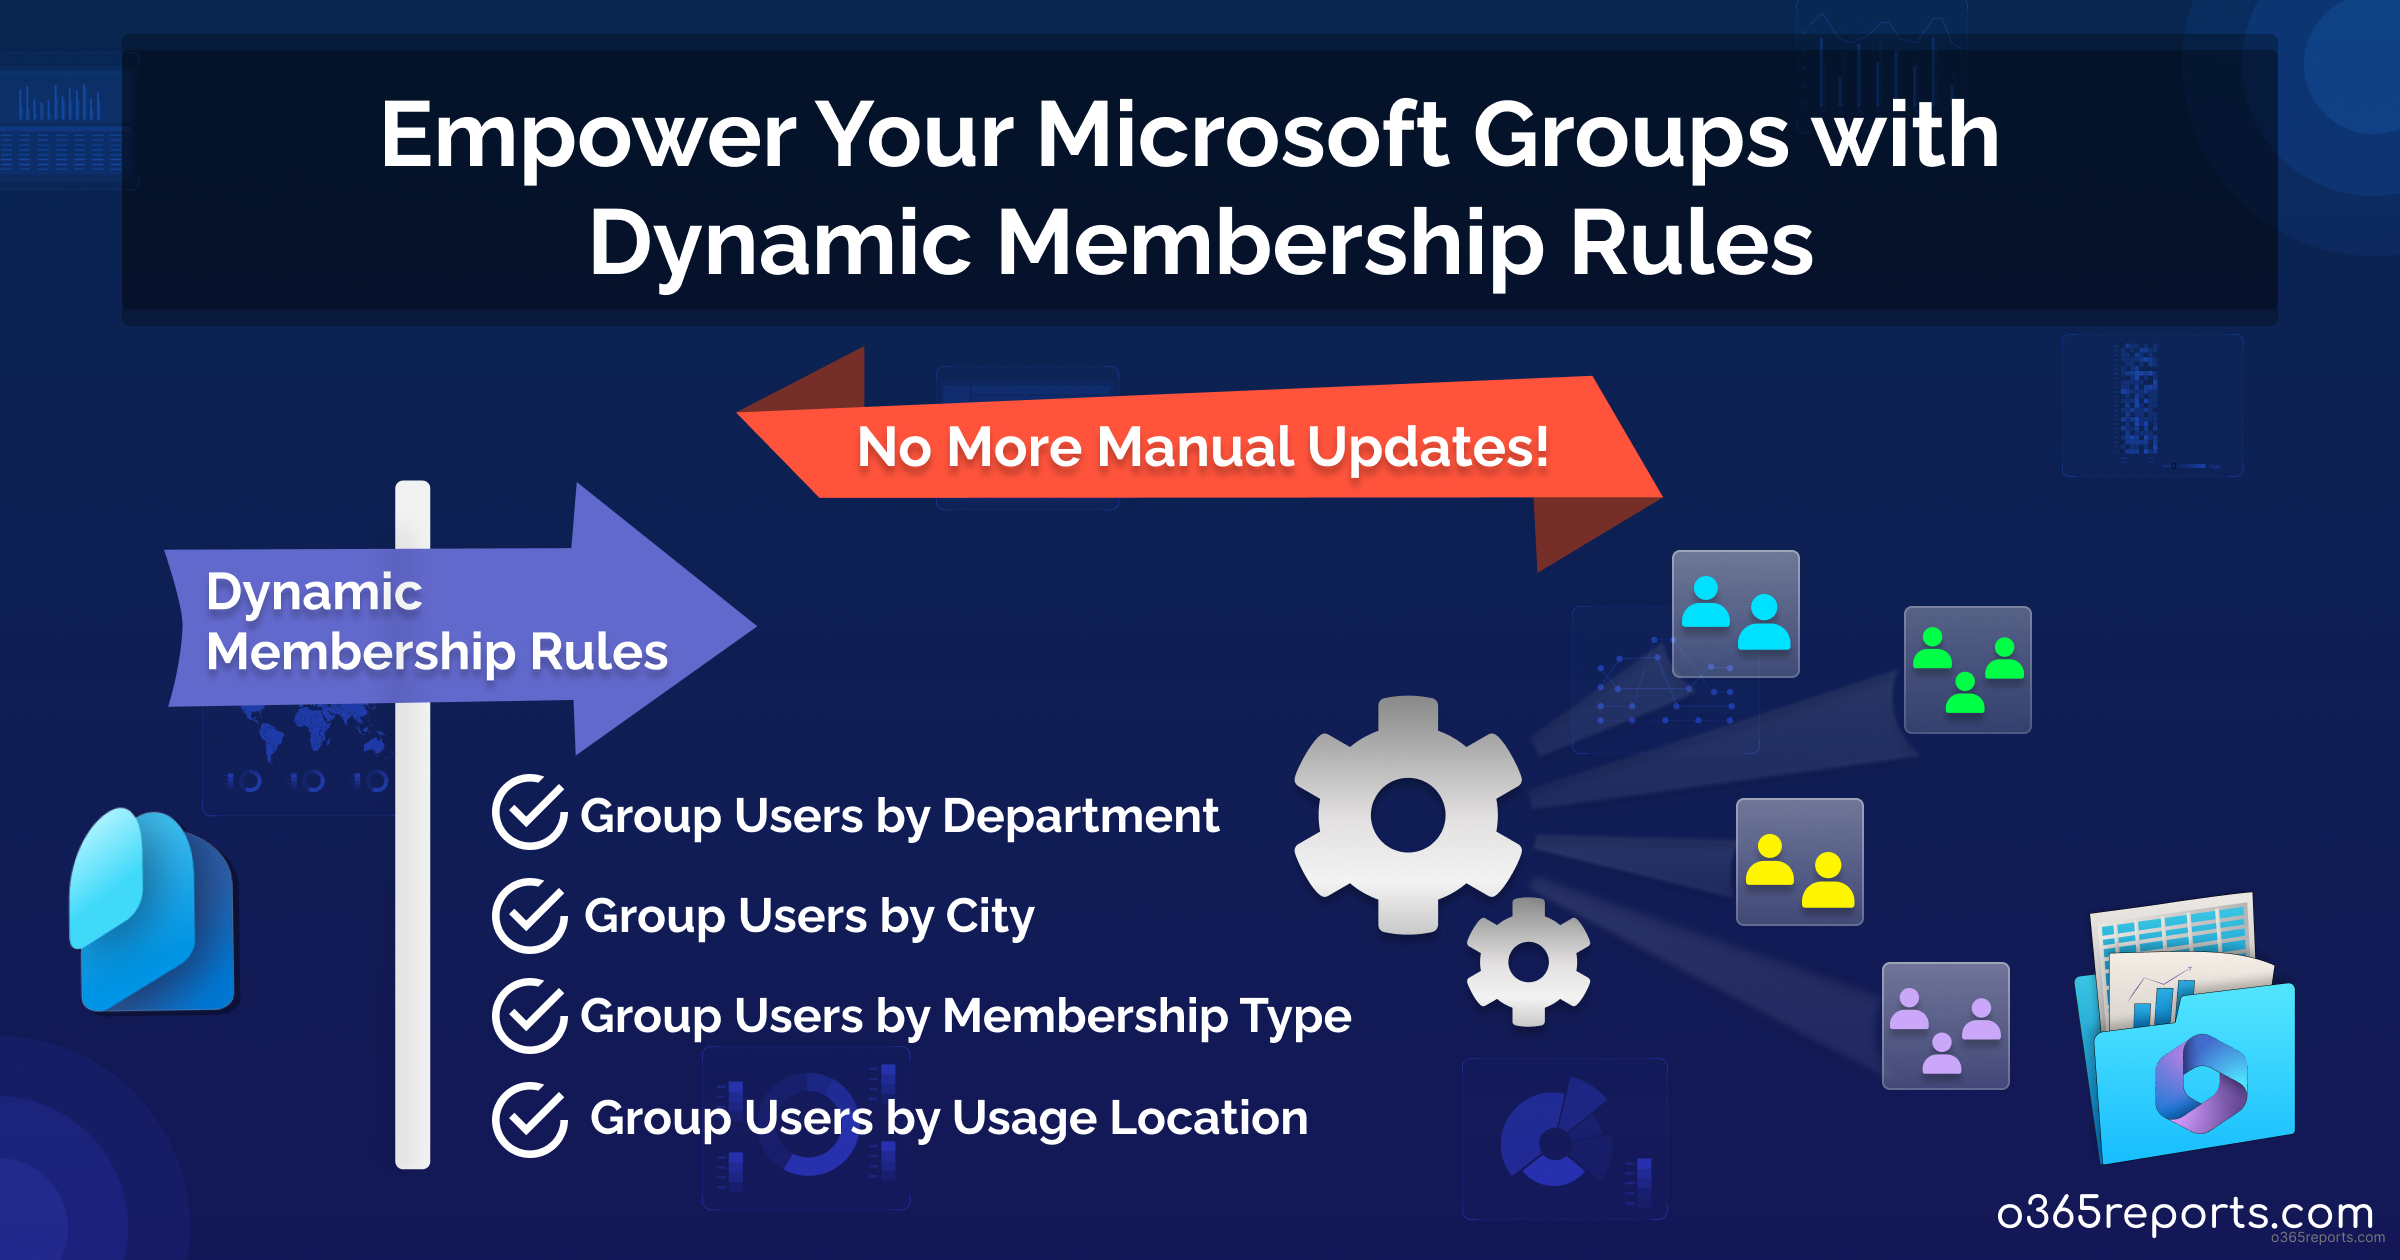 Empower Your Microsoft Groups with Dynamic Membership Rules in Entra